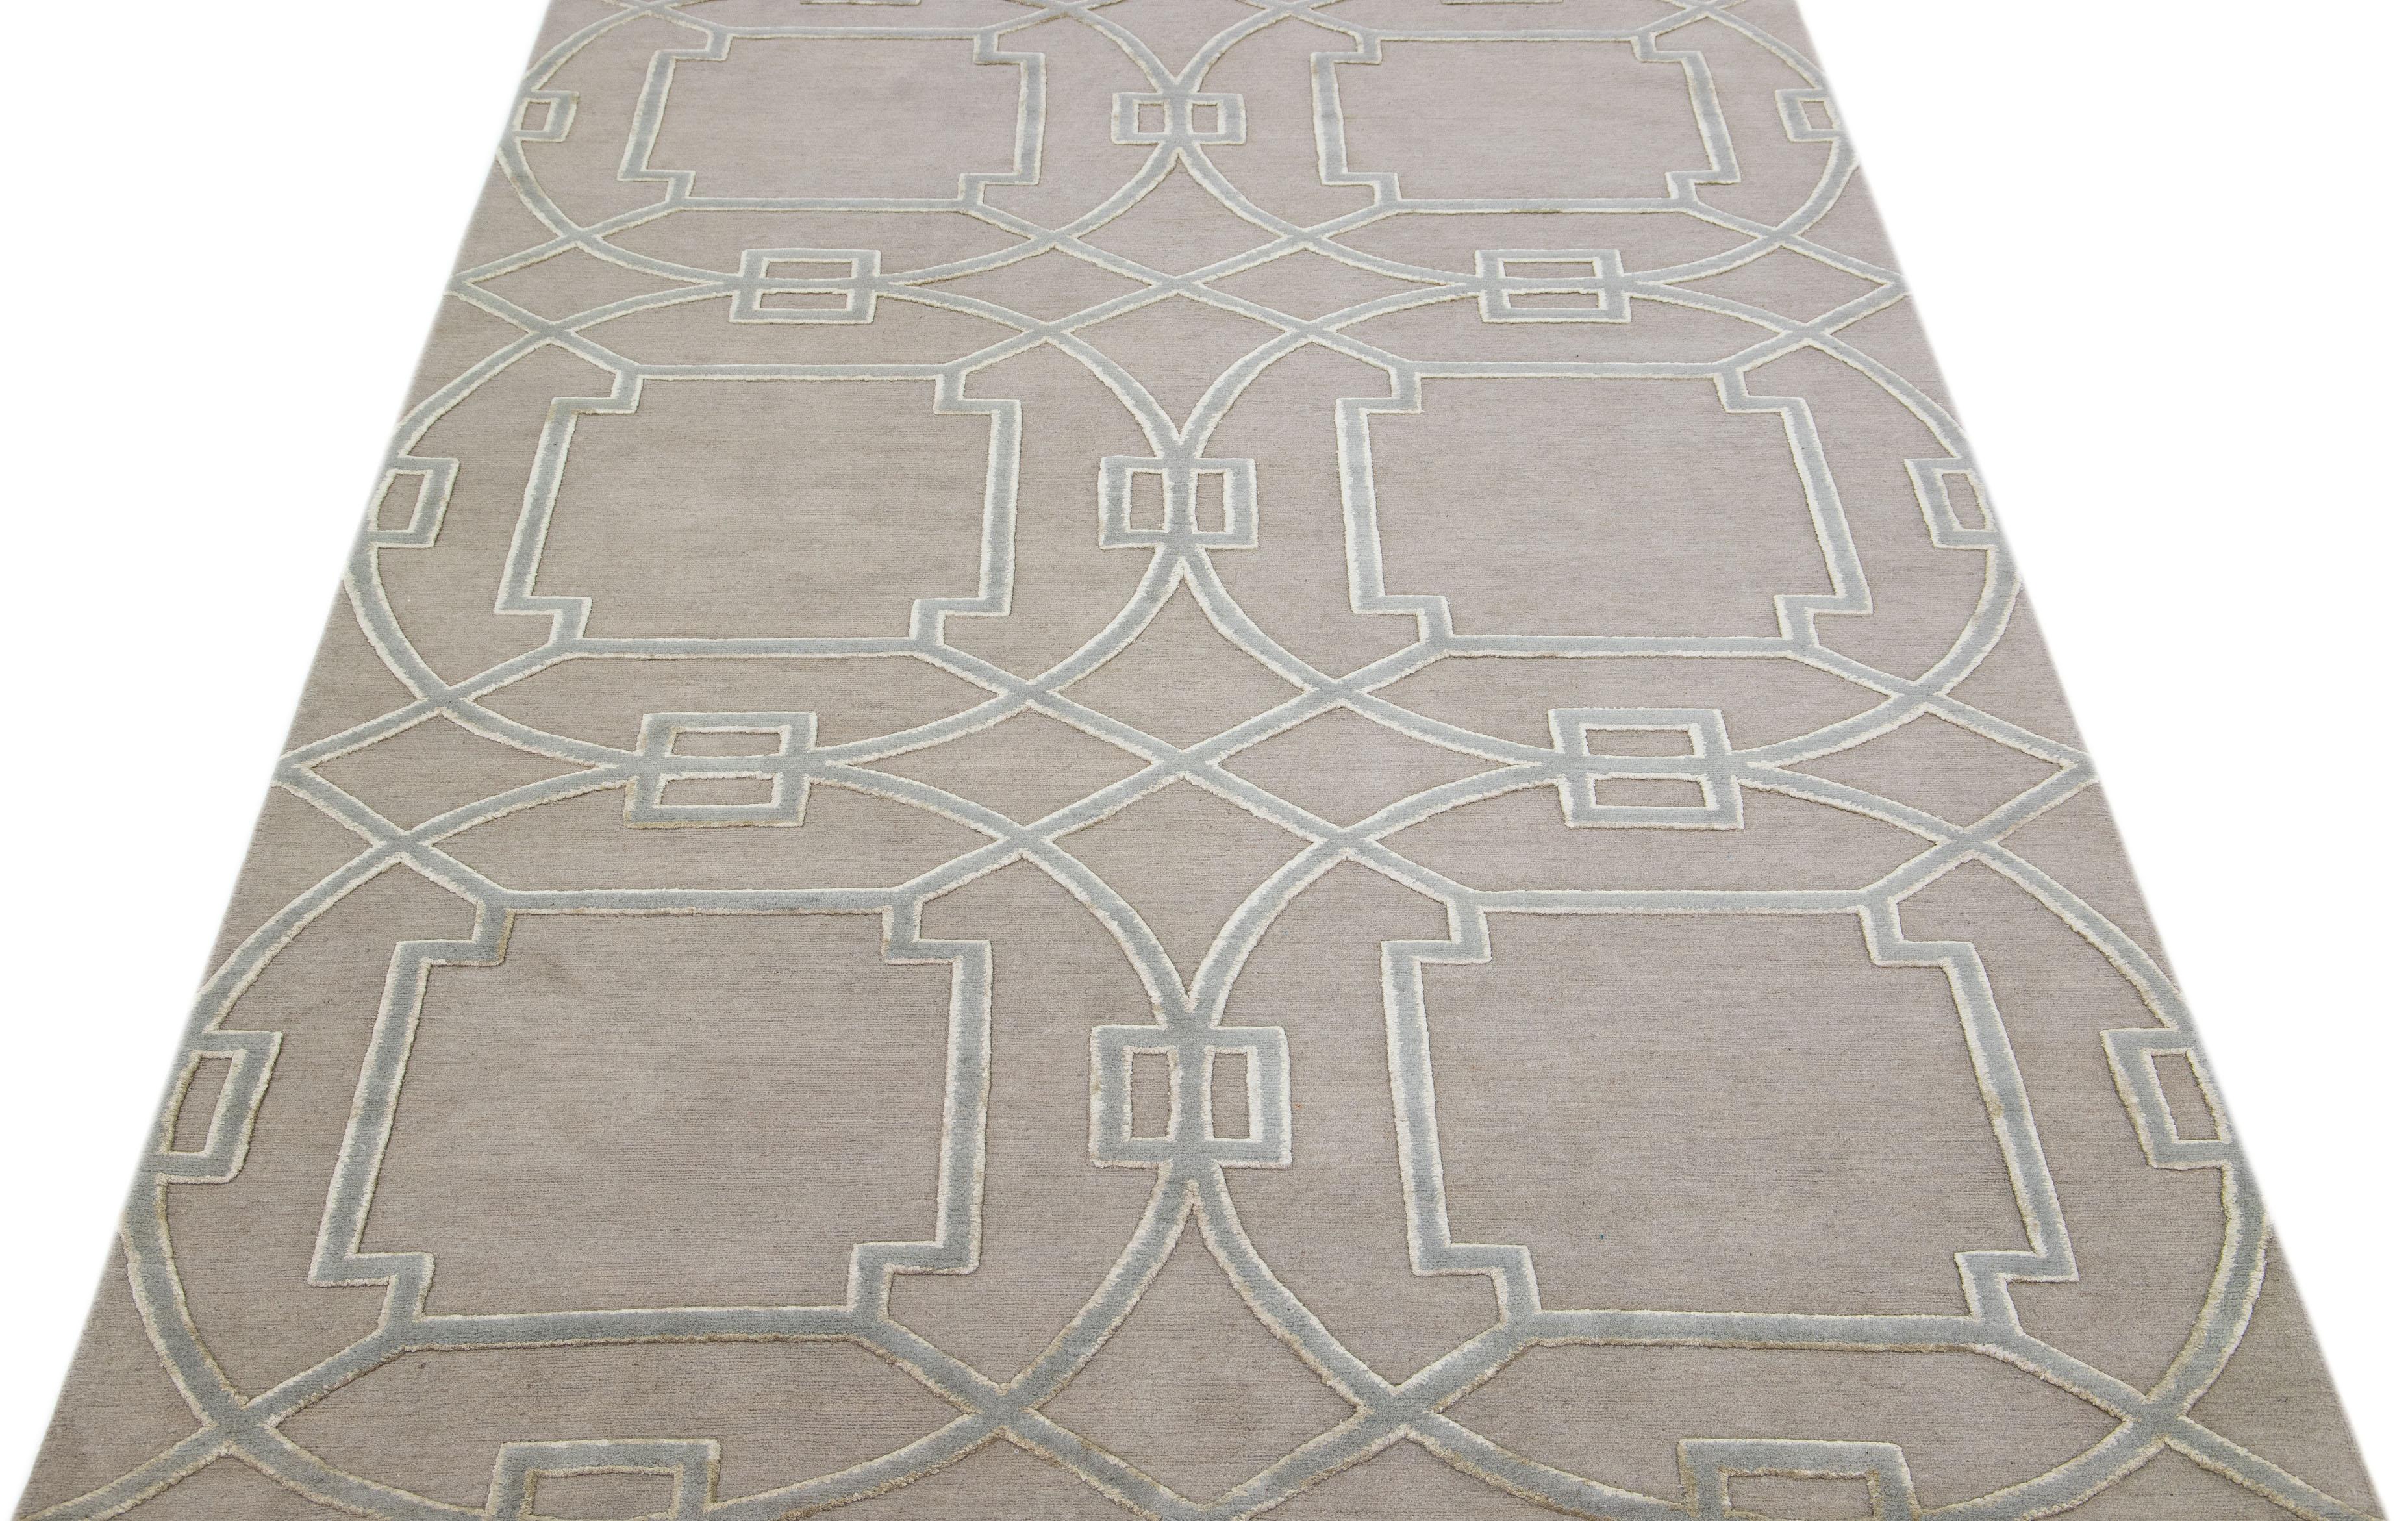 Meticulously crafted by hand using a blend of silk and wool, this exquisite contemporary rug from Tibet showcases a stunning beige foundation perfectly accentuated by an alluring abstract geometric design in shades of gray.

This rug measures 6' x